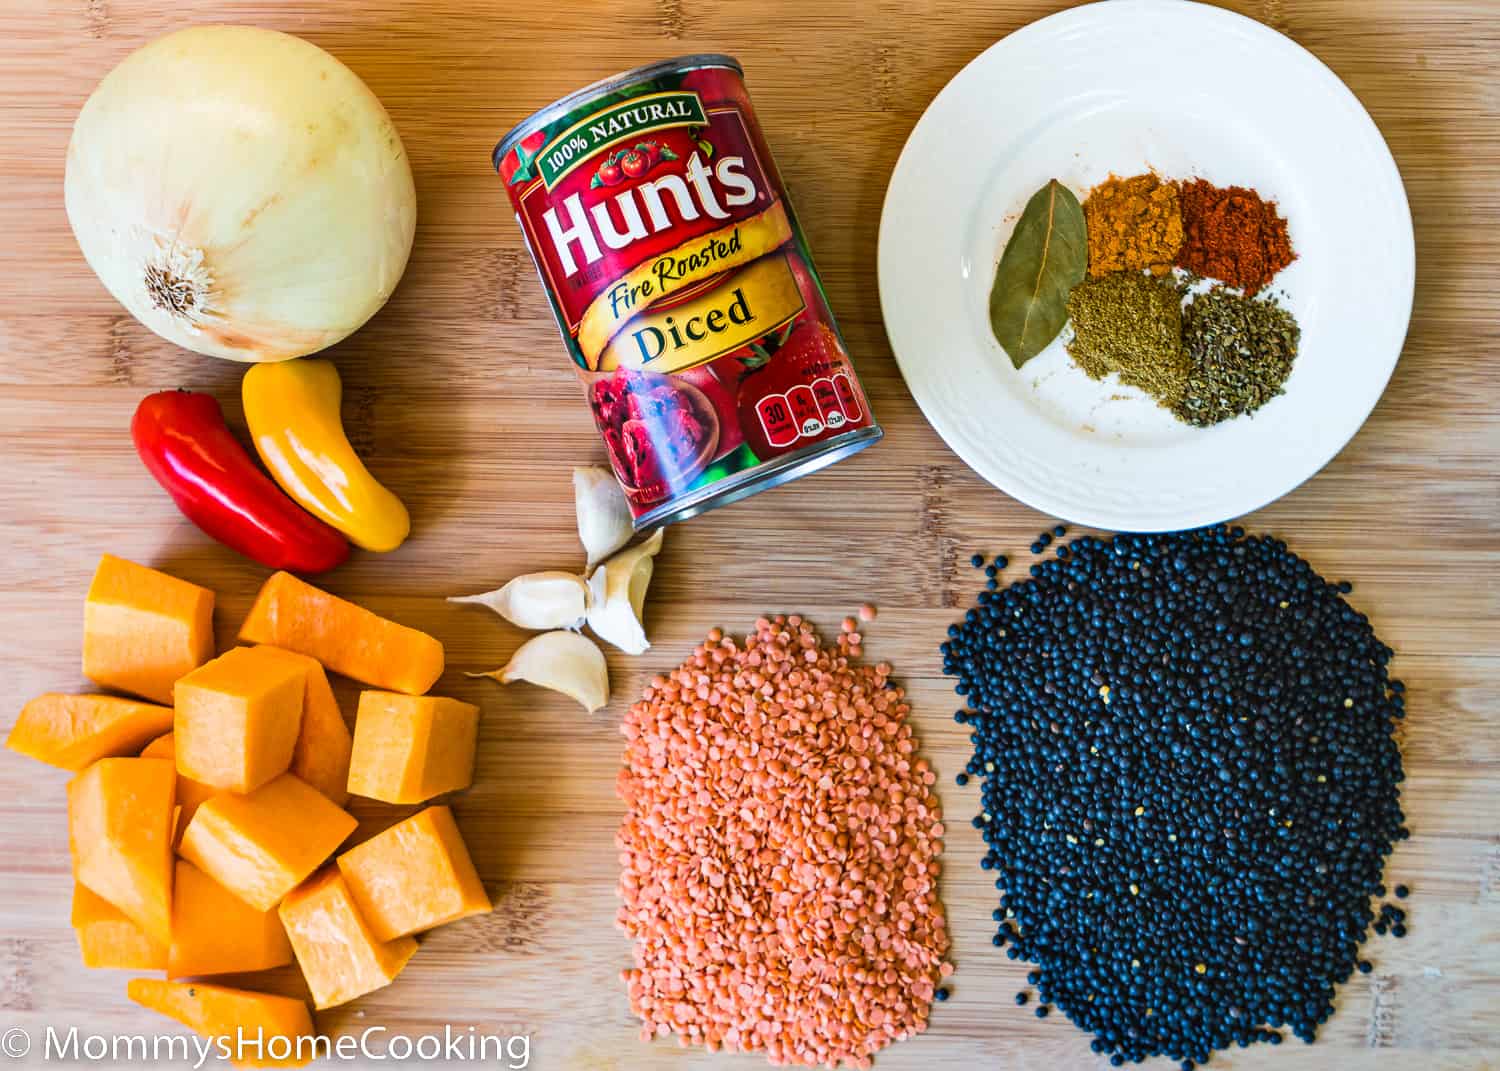 Lentils and Butternut Squash Soup Ingredients.